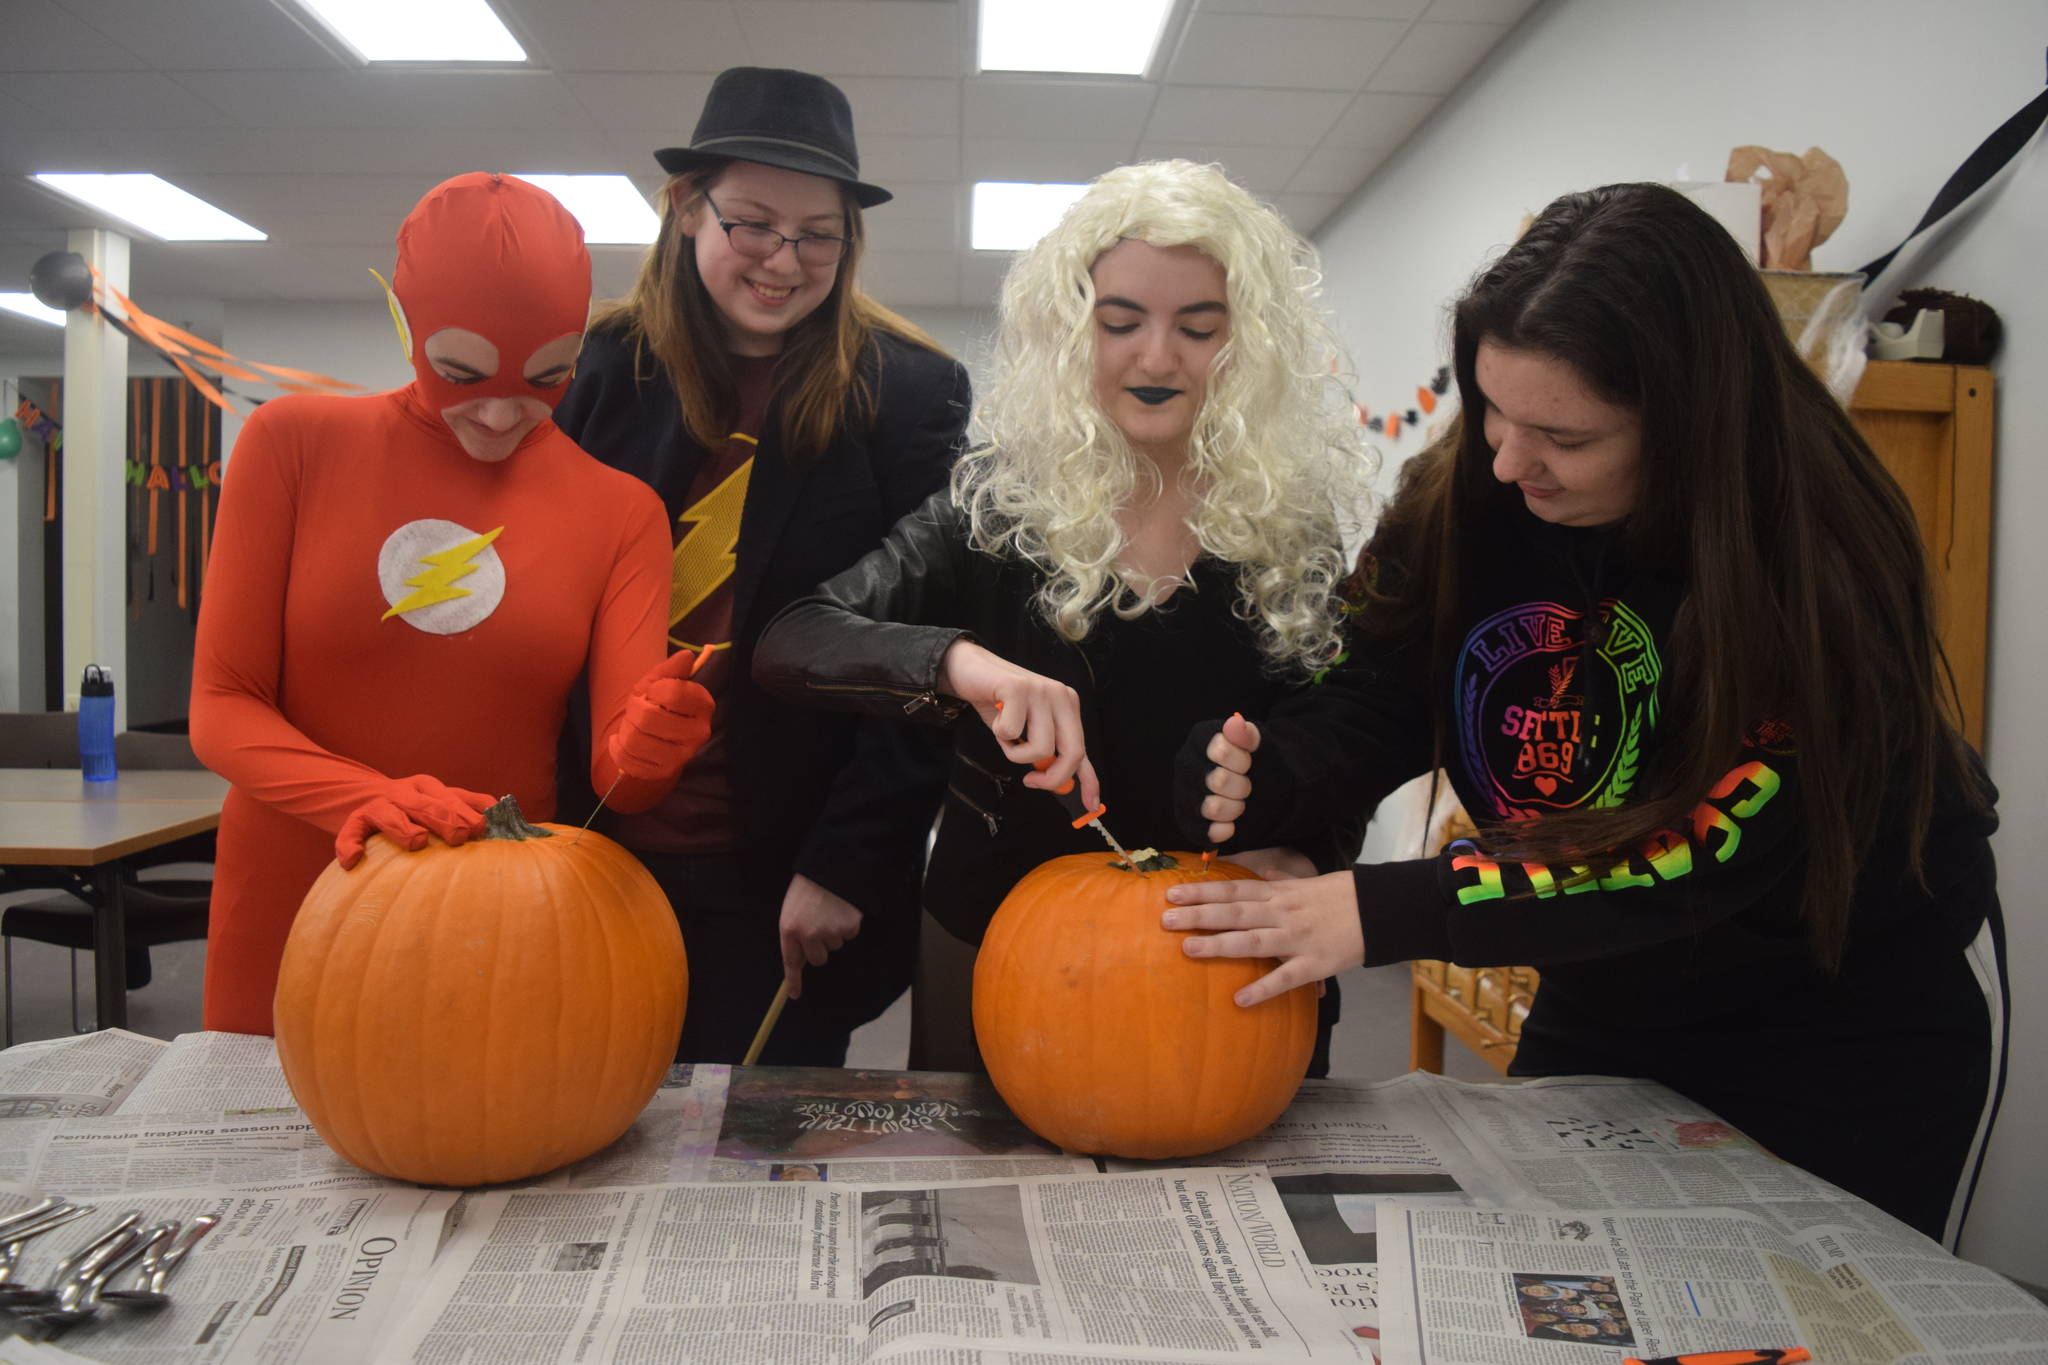 Tori Giles, left, Emilie Grimes, Torile Giles and Arin Reger carve pumkings at the Soldotna Public Library on Saturday, October 21, 2017 during the library’s teen halloween party. The group donned costumes from The Flash, including The Flash, Killer Frost and Harrison Wells. (Photo by Kat Sorensen/Peninsula Clarion)                                Tori Giles, left, Emilie Grimes, Torile Giles and Arin Reger carve pumkings at the Soldotna Public Library on Saturday, Oct. 21, 2017 during the library’s teen halloween party. The group donned costumes from The Flash, including The Flash, Killer Frost and Harrison Wells. (Photo by Kat Sorensen/Peninsula Clarion)